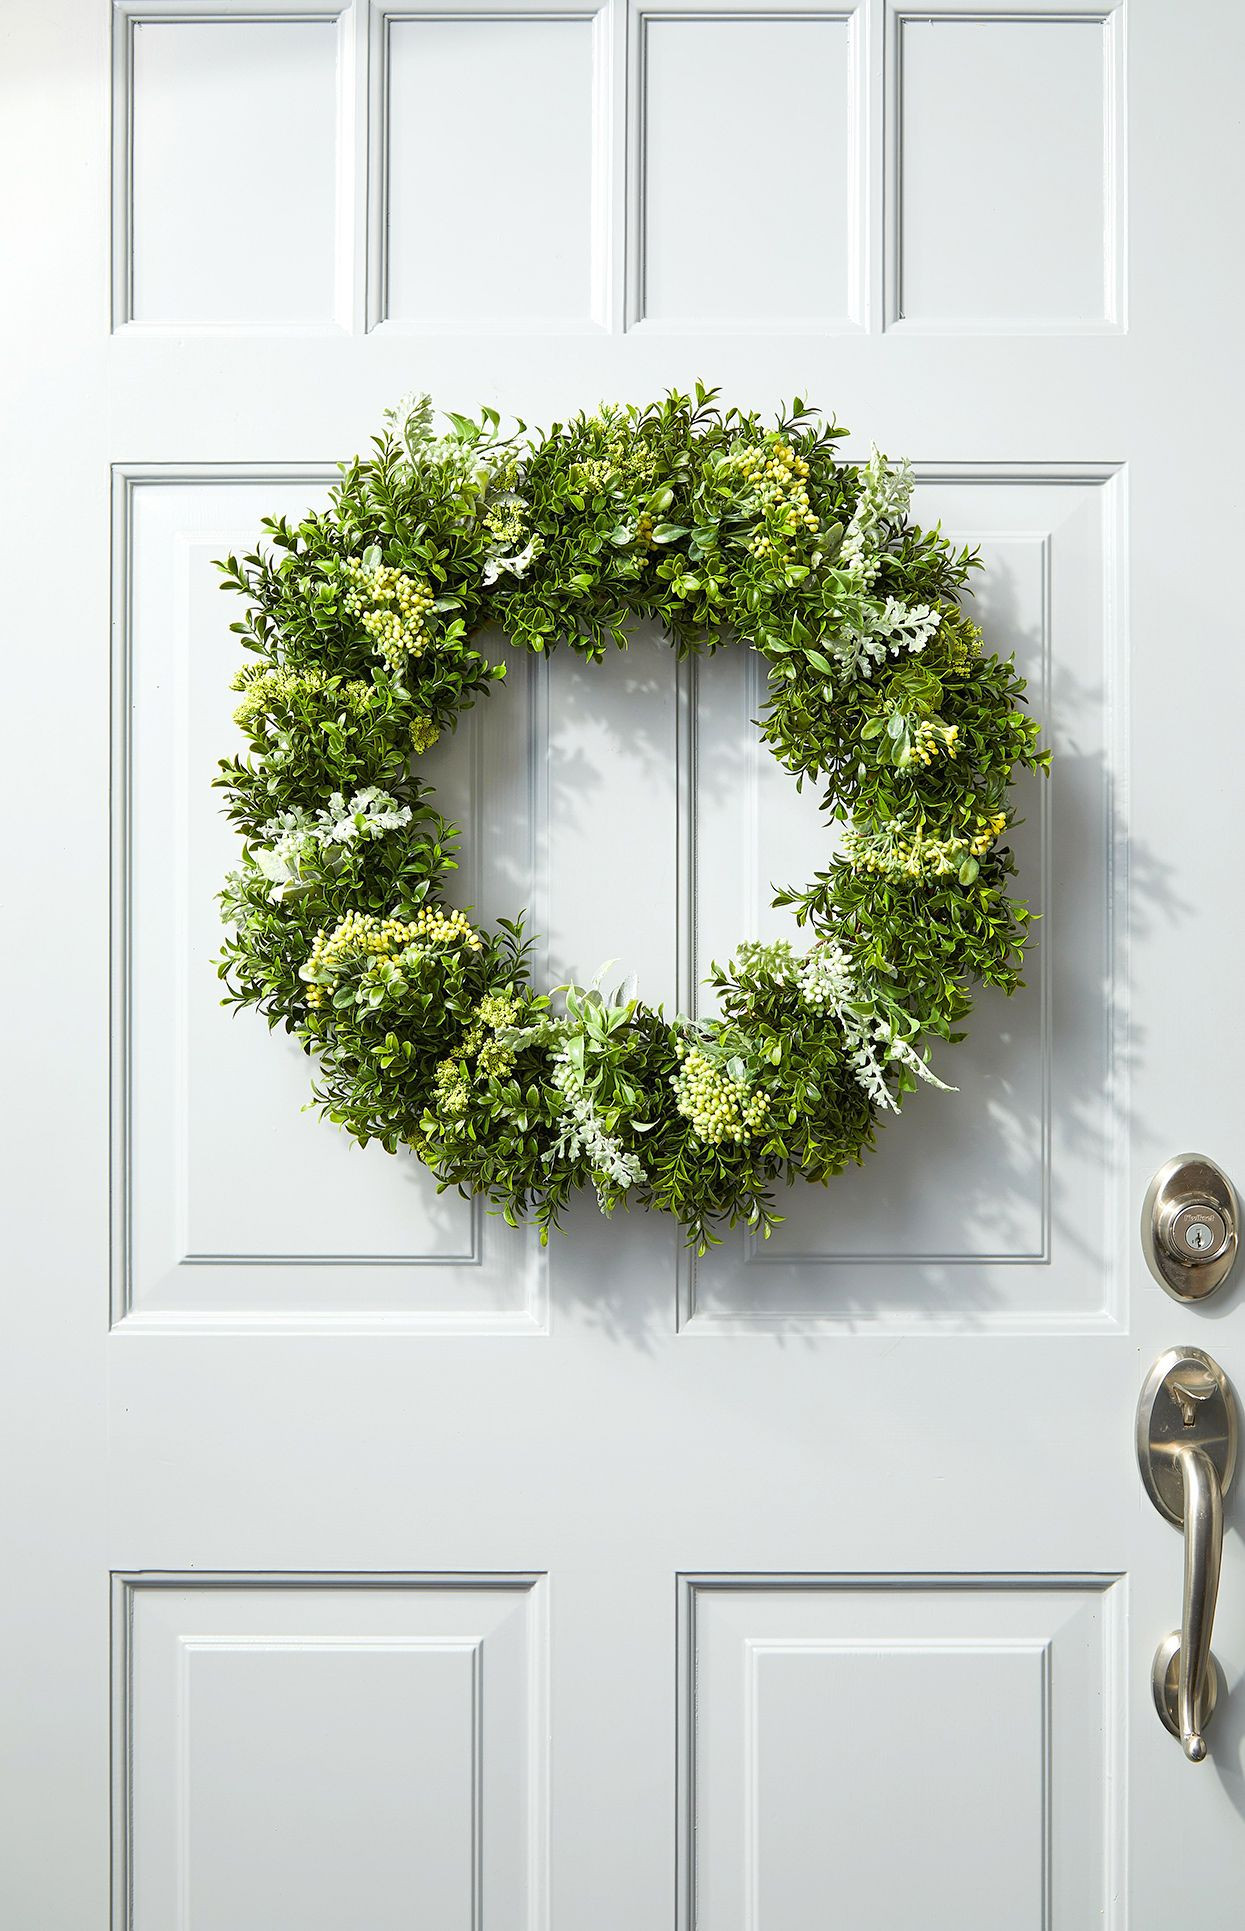 DIY Faux Boxwood Wreath
 Make a DIY Faux Boxwood Wreath for Your Front Door